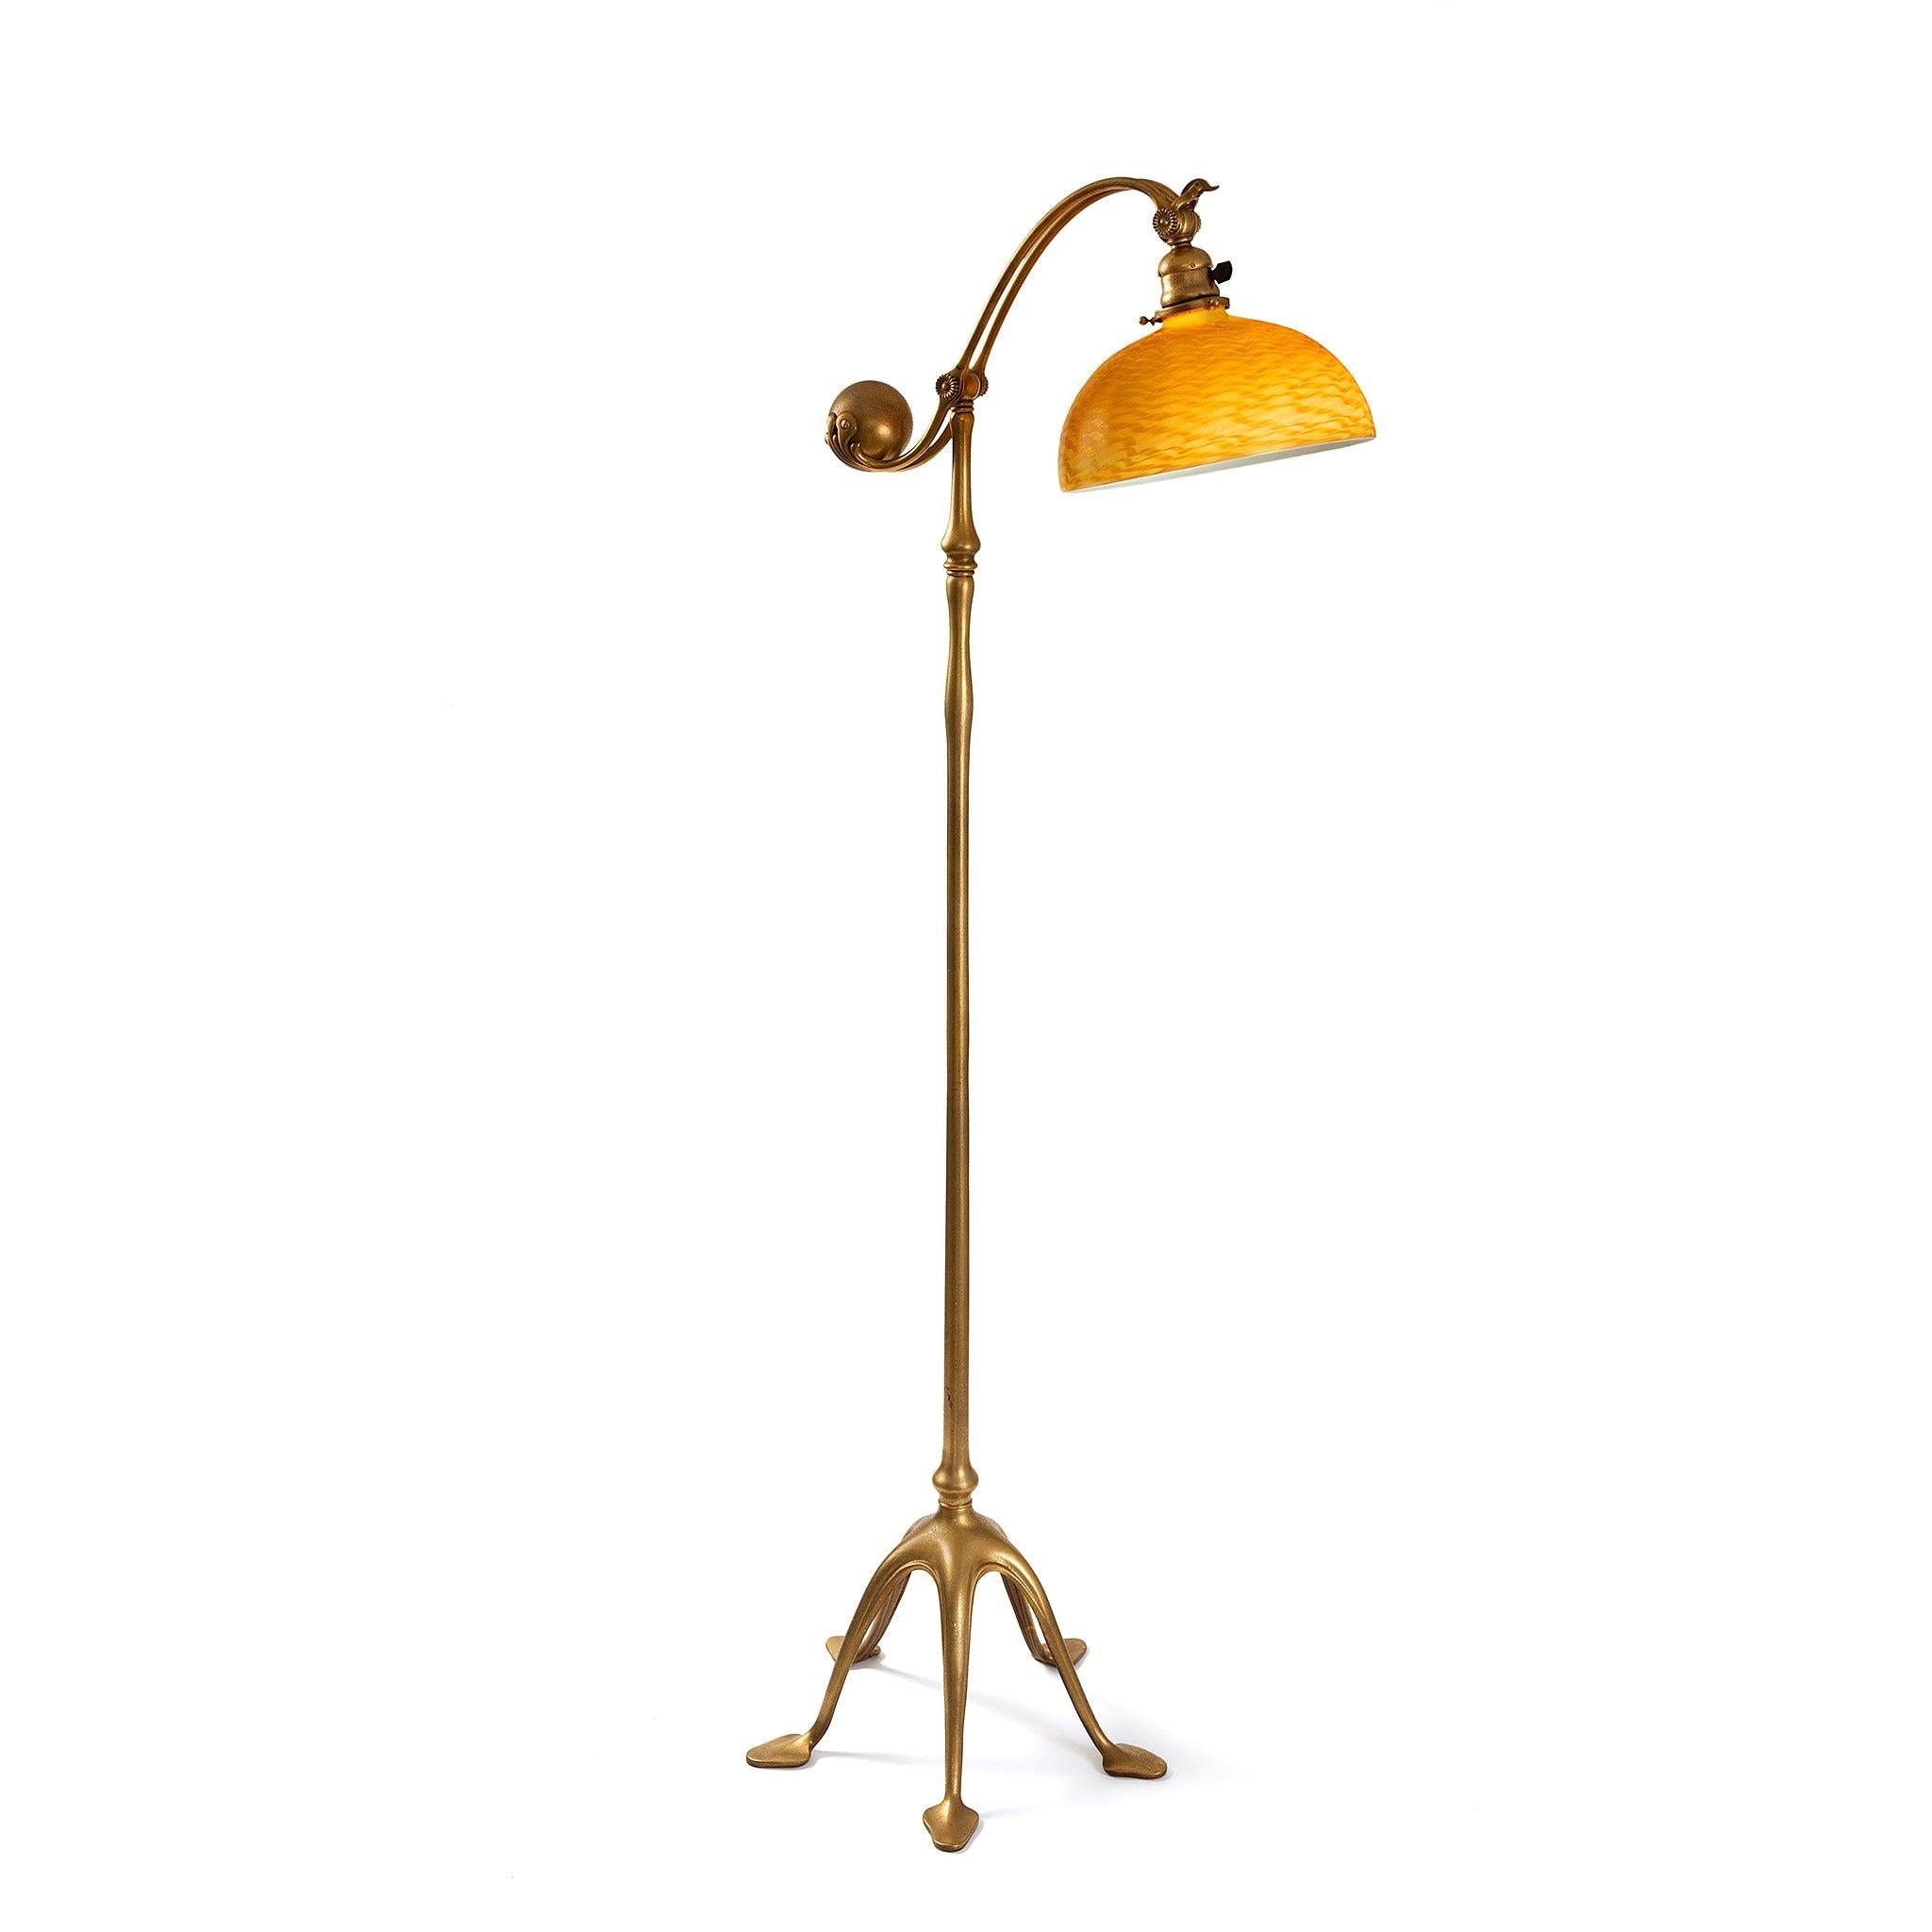 This Tiffany Studios New York glass and gilt bronze floor lamp, features a shimmering twisted gold and amber 